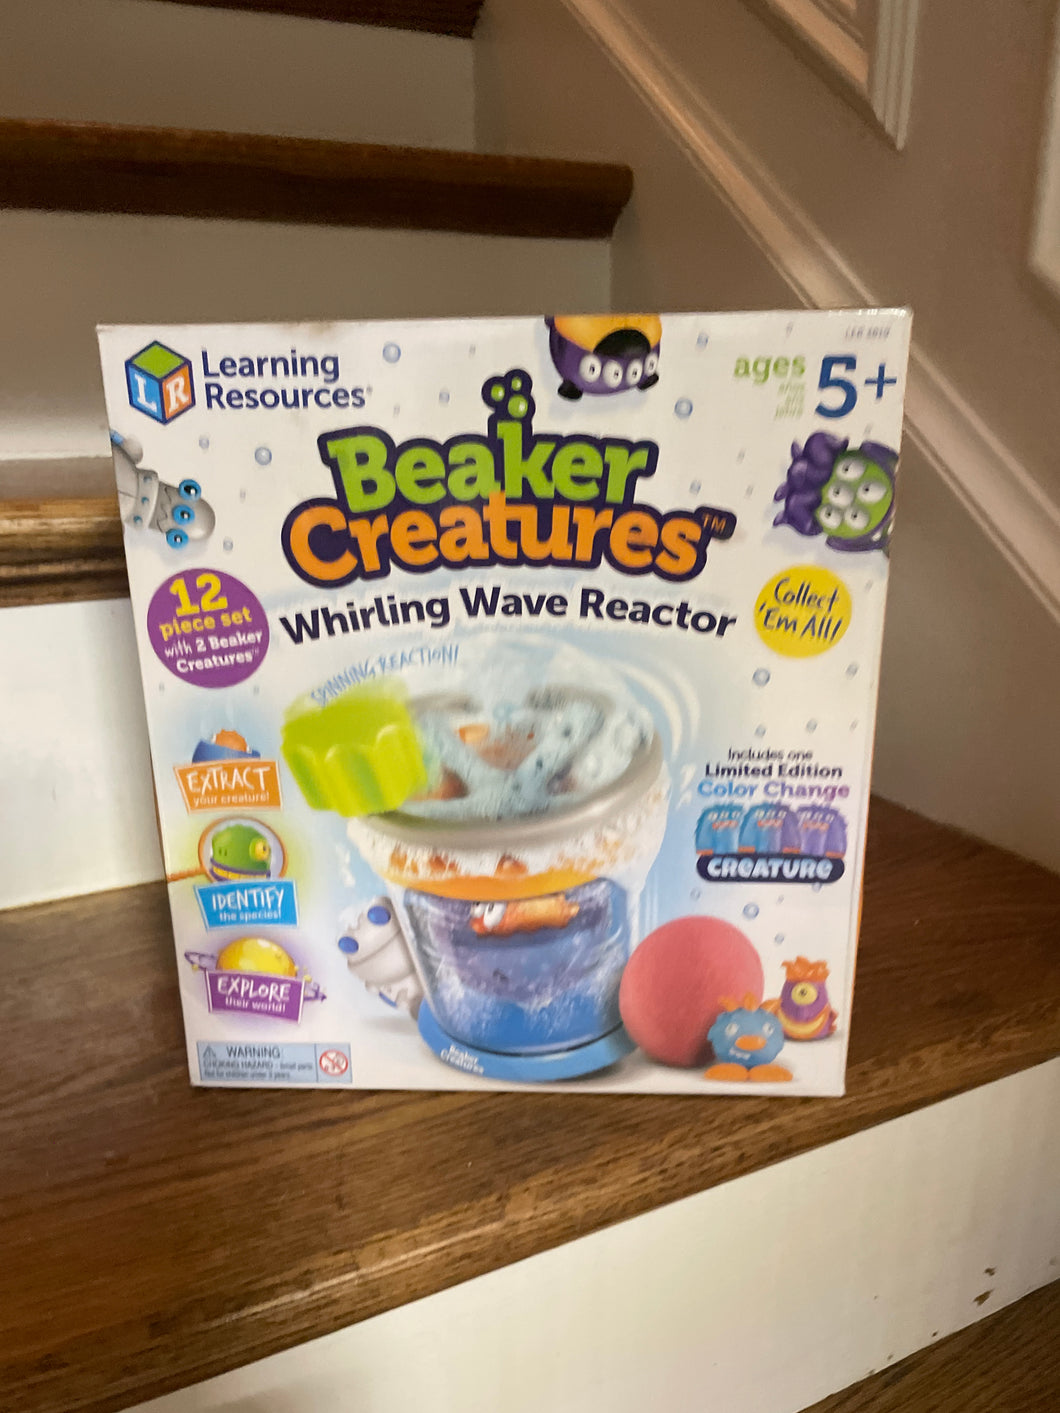 Learning resources beaker creatures whirling reactor